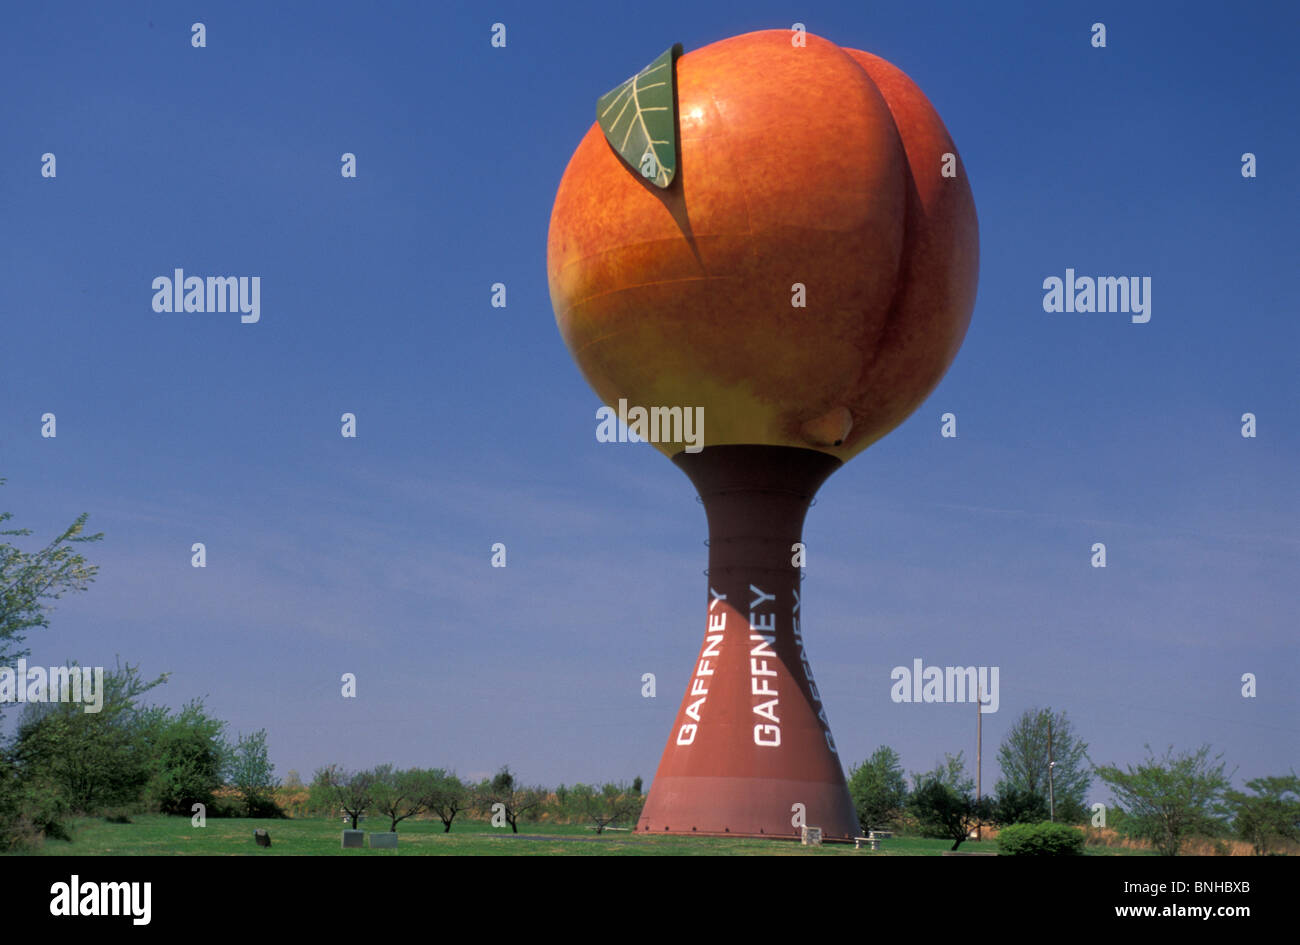 Usa Gaffney South Carolina Watertank Peach Form Remarkable Striking Rural Landscape Countryside United States of America Stock Photo